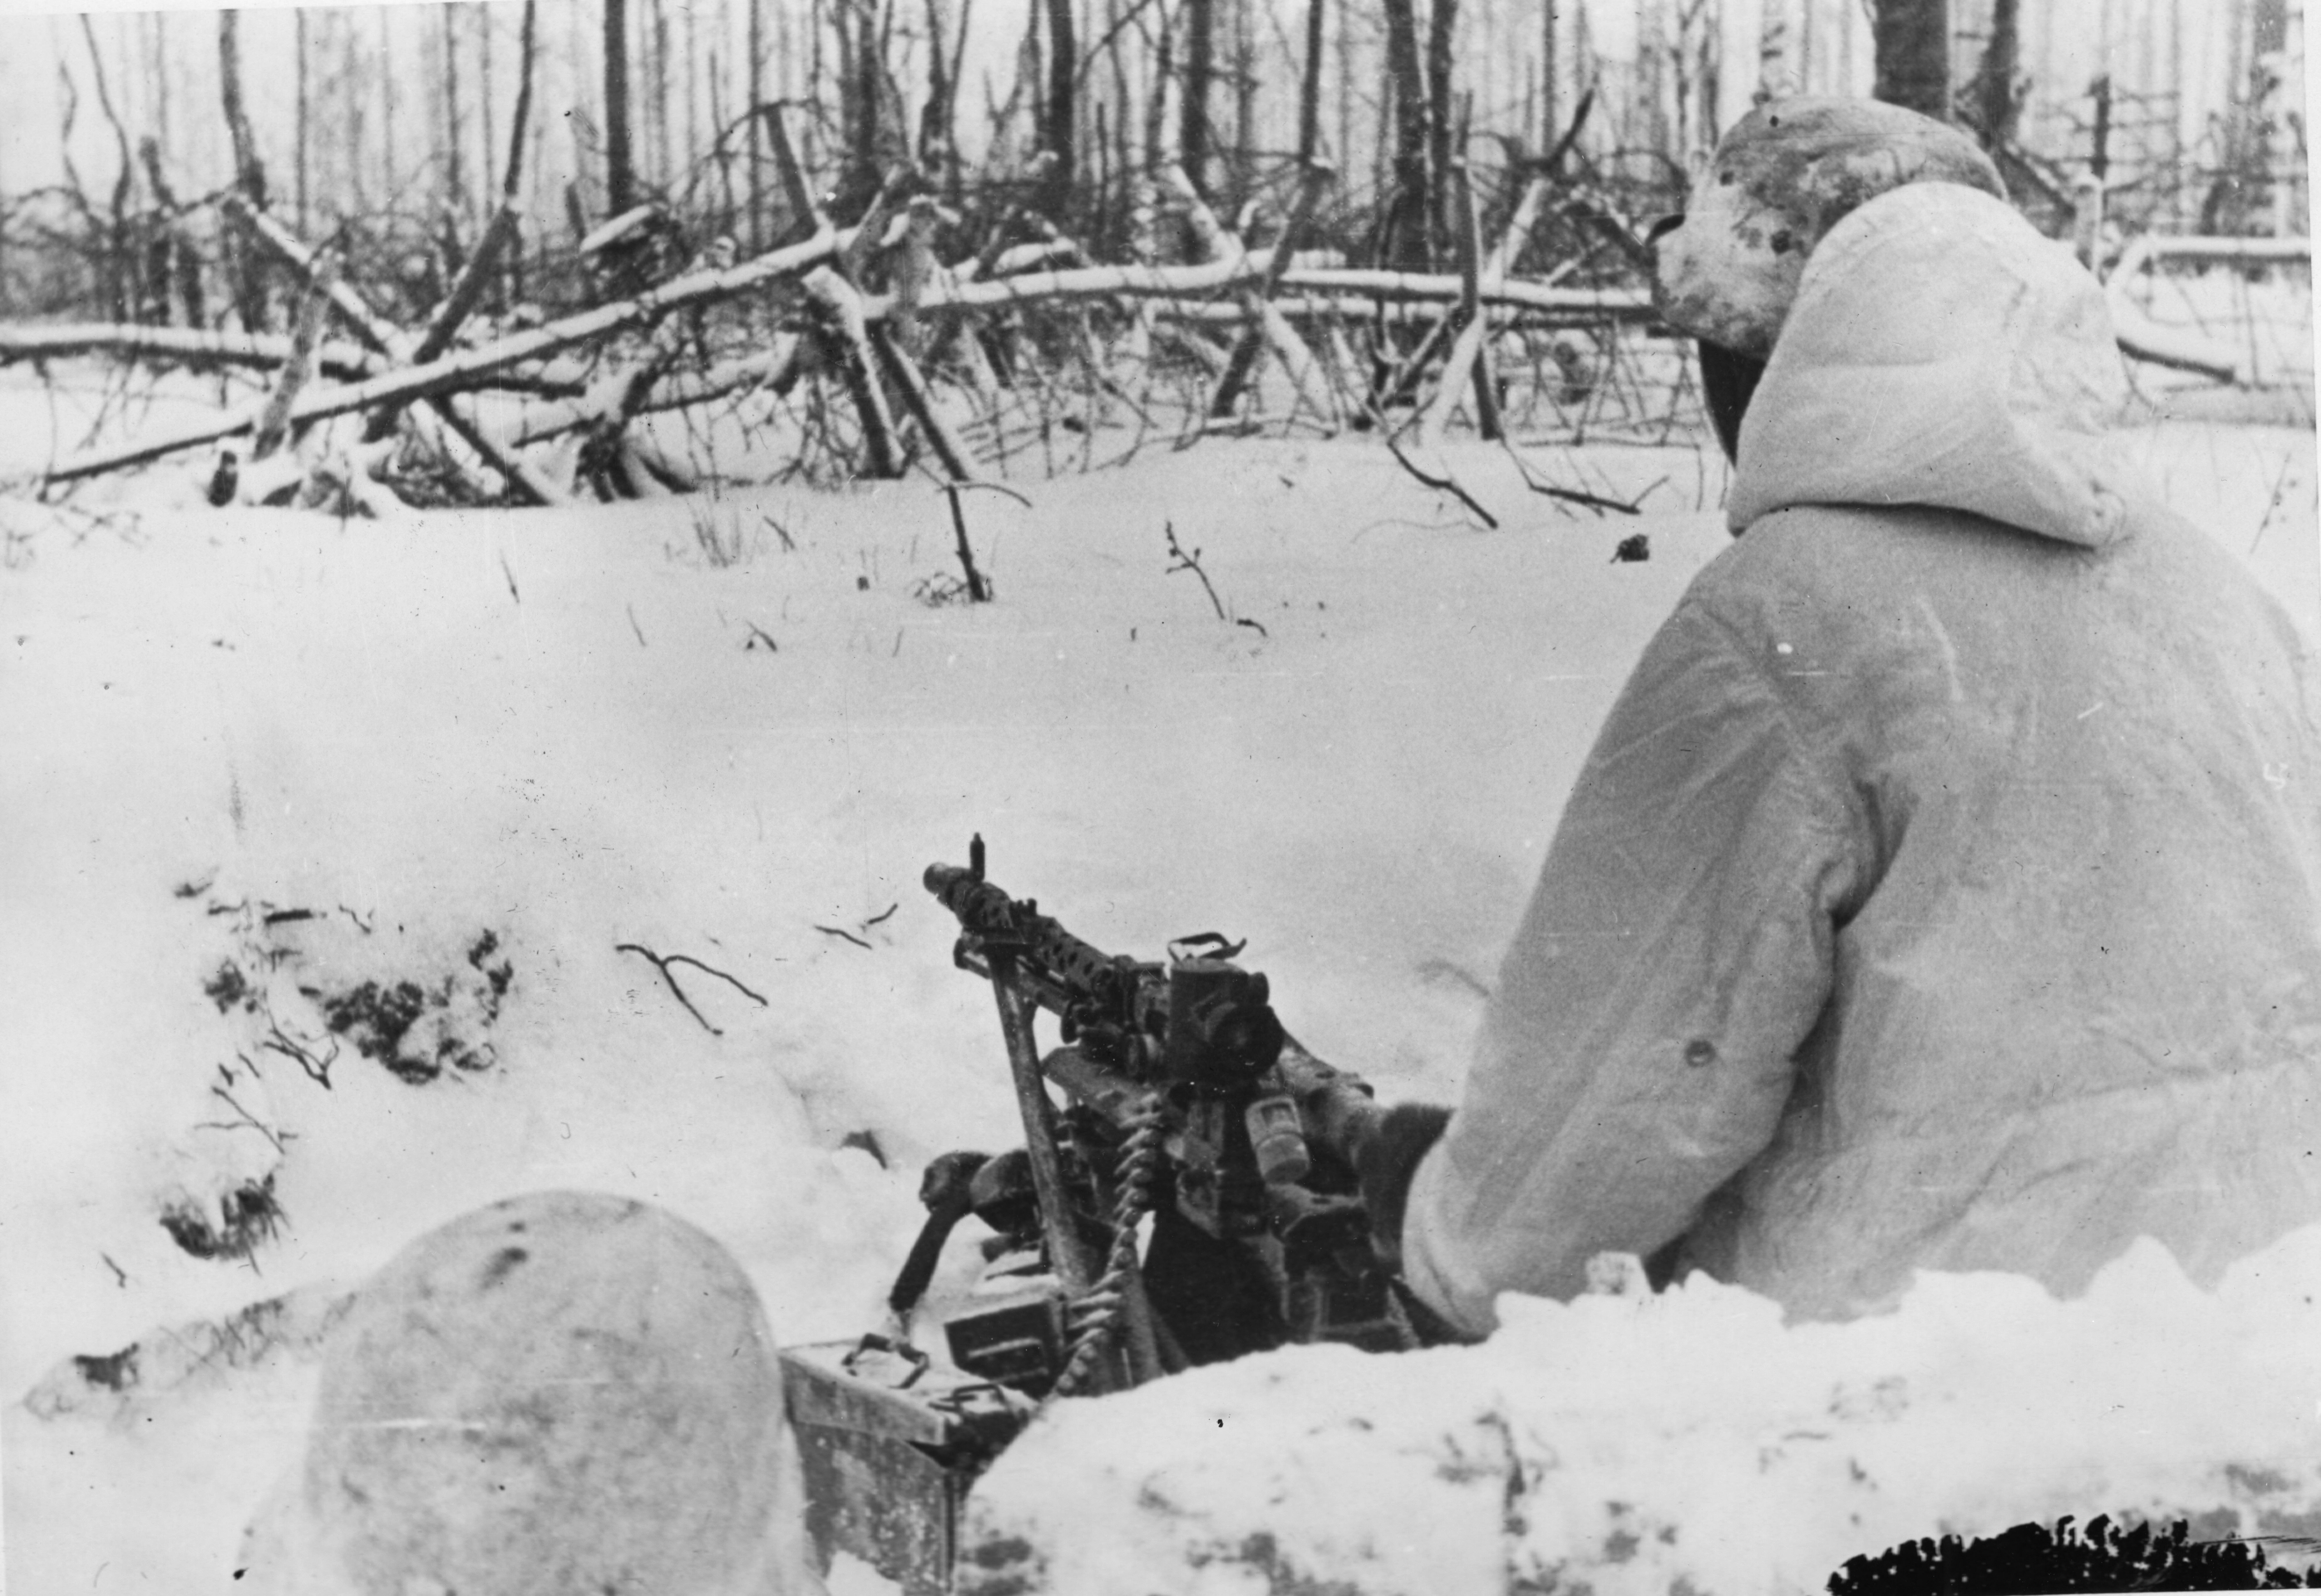 Manning an MG 34 mounted